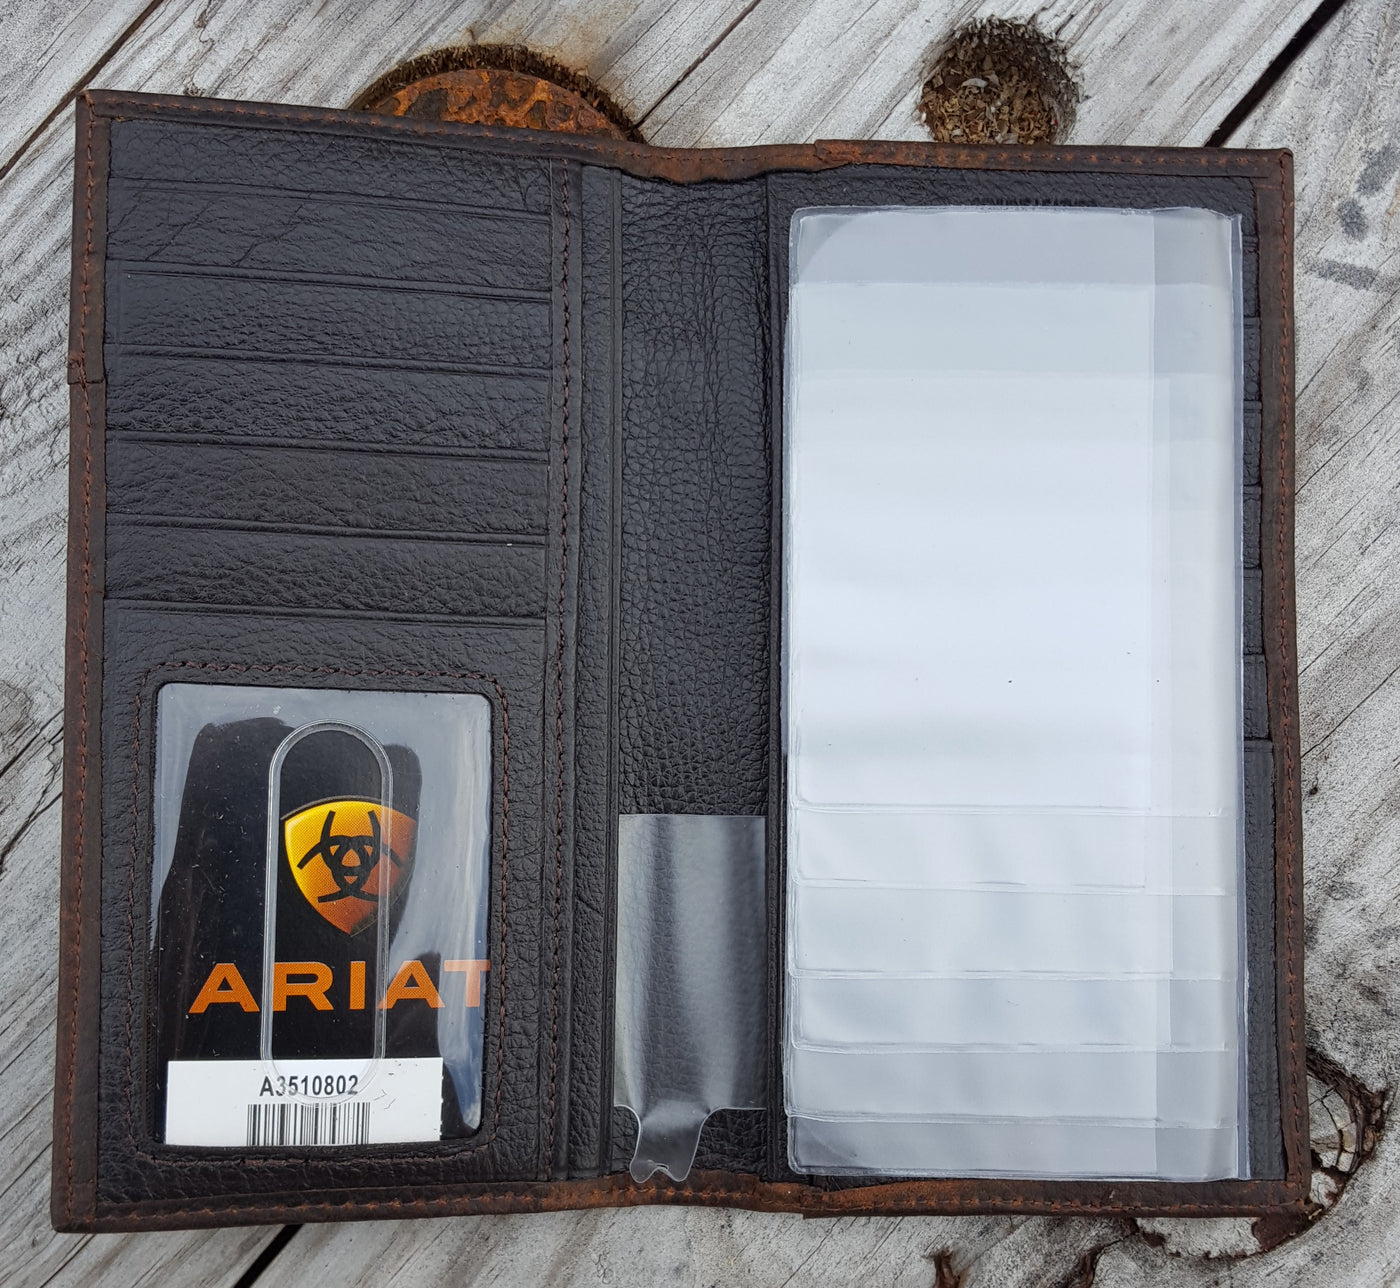 Ariat Rodeo Wallet with overlay, inside left view- Ariat Rodeo style wallet  Wallet is distressed brown leather with Ariat shield concho. Multiple credit card slots, clear drivers license slot and removable picture holder.  Folded wallet measures 7" tall by 3" wide. Interior has 12 card slots, one open cash pocket, and an identification window.